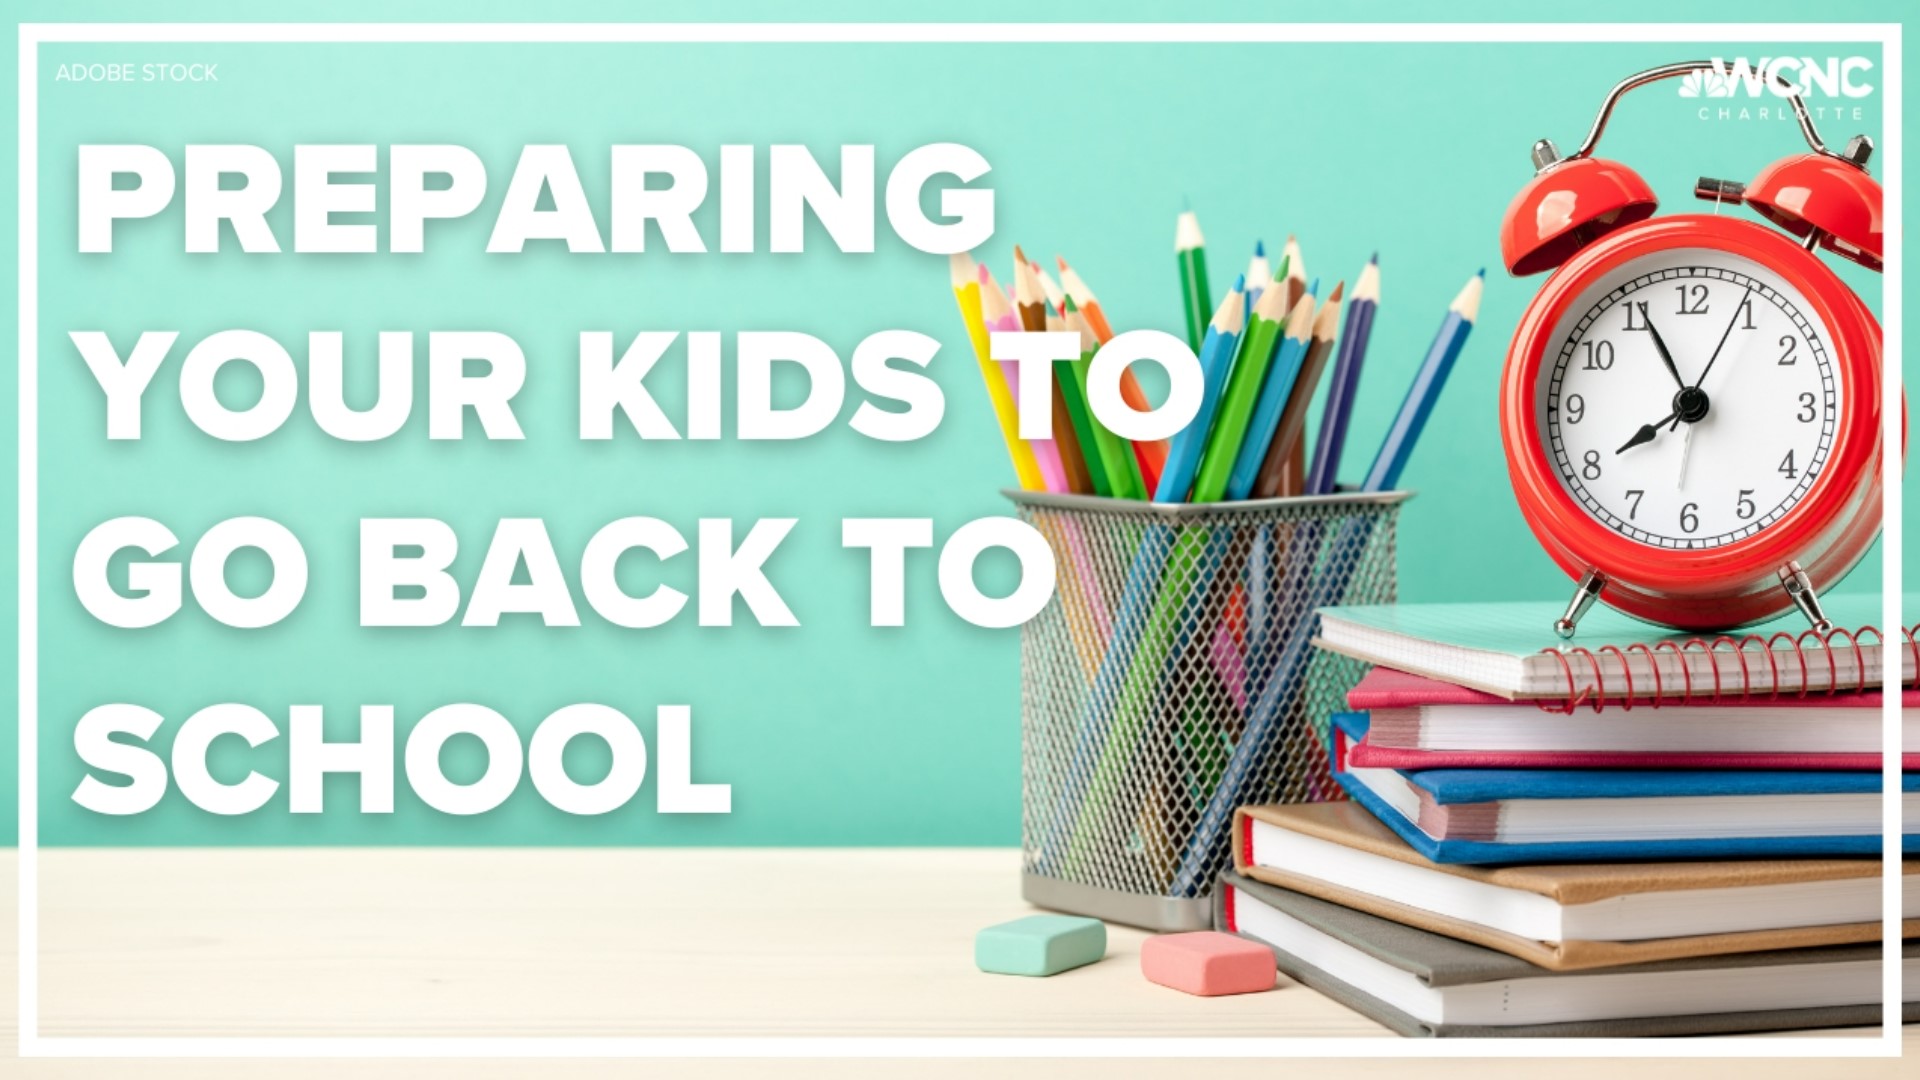 According to Deloitte’s back-to-school survey, parents are planning to spend more than $600 on supplies. That’s up 8% over last year.